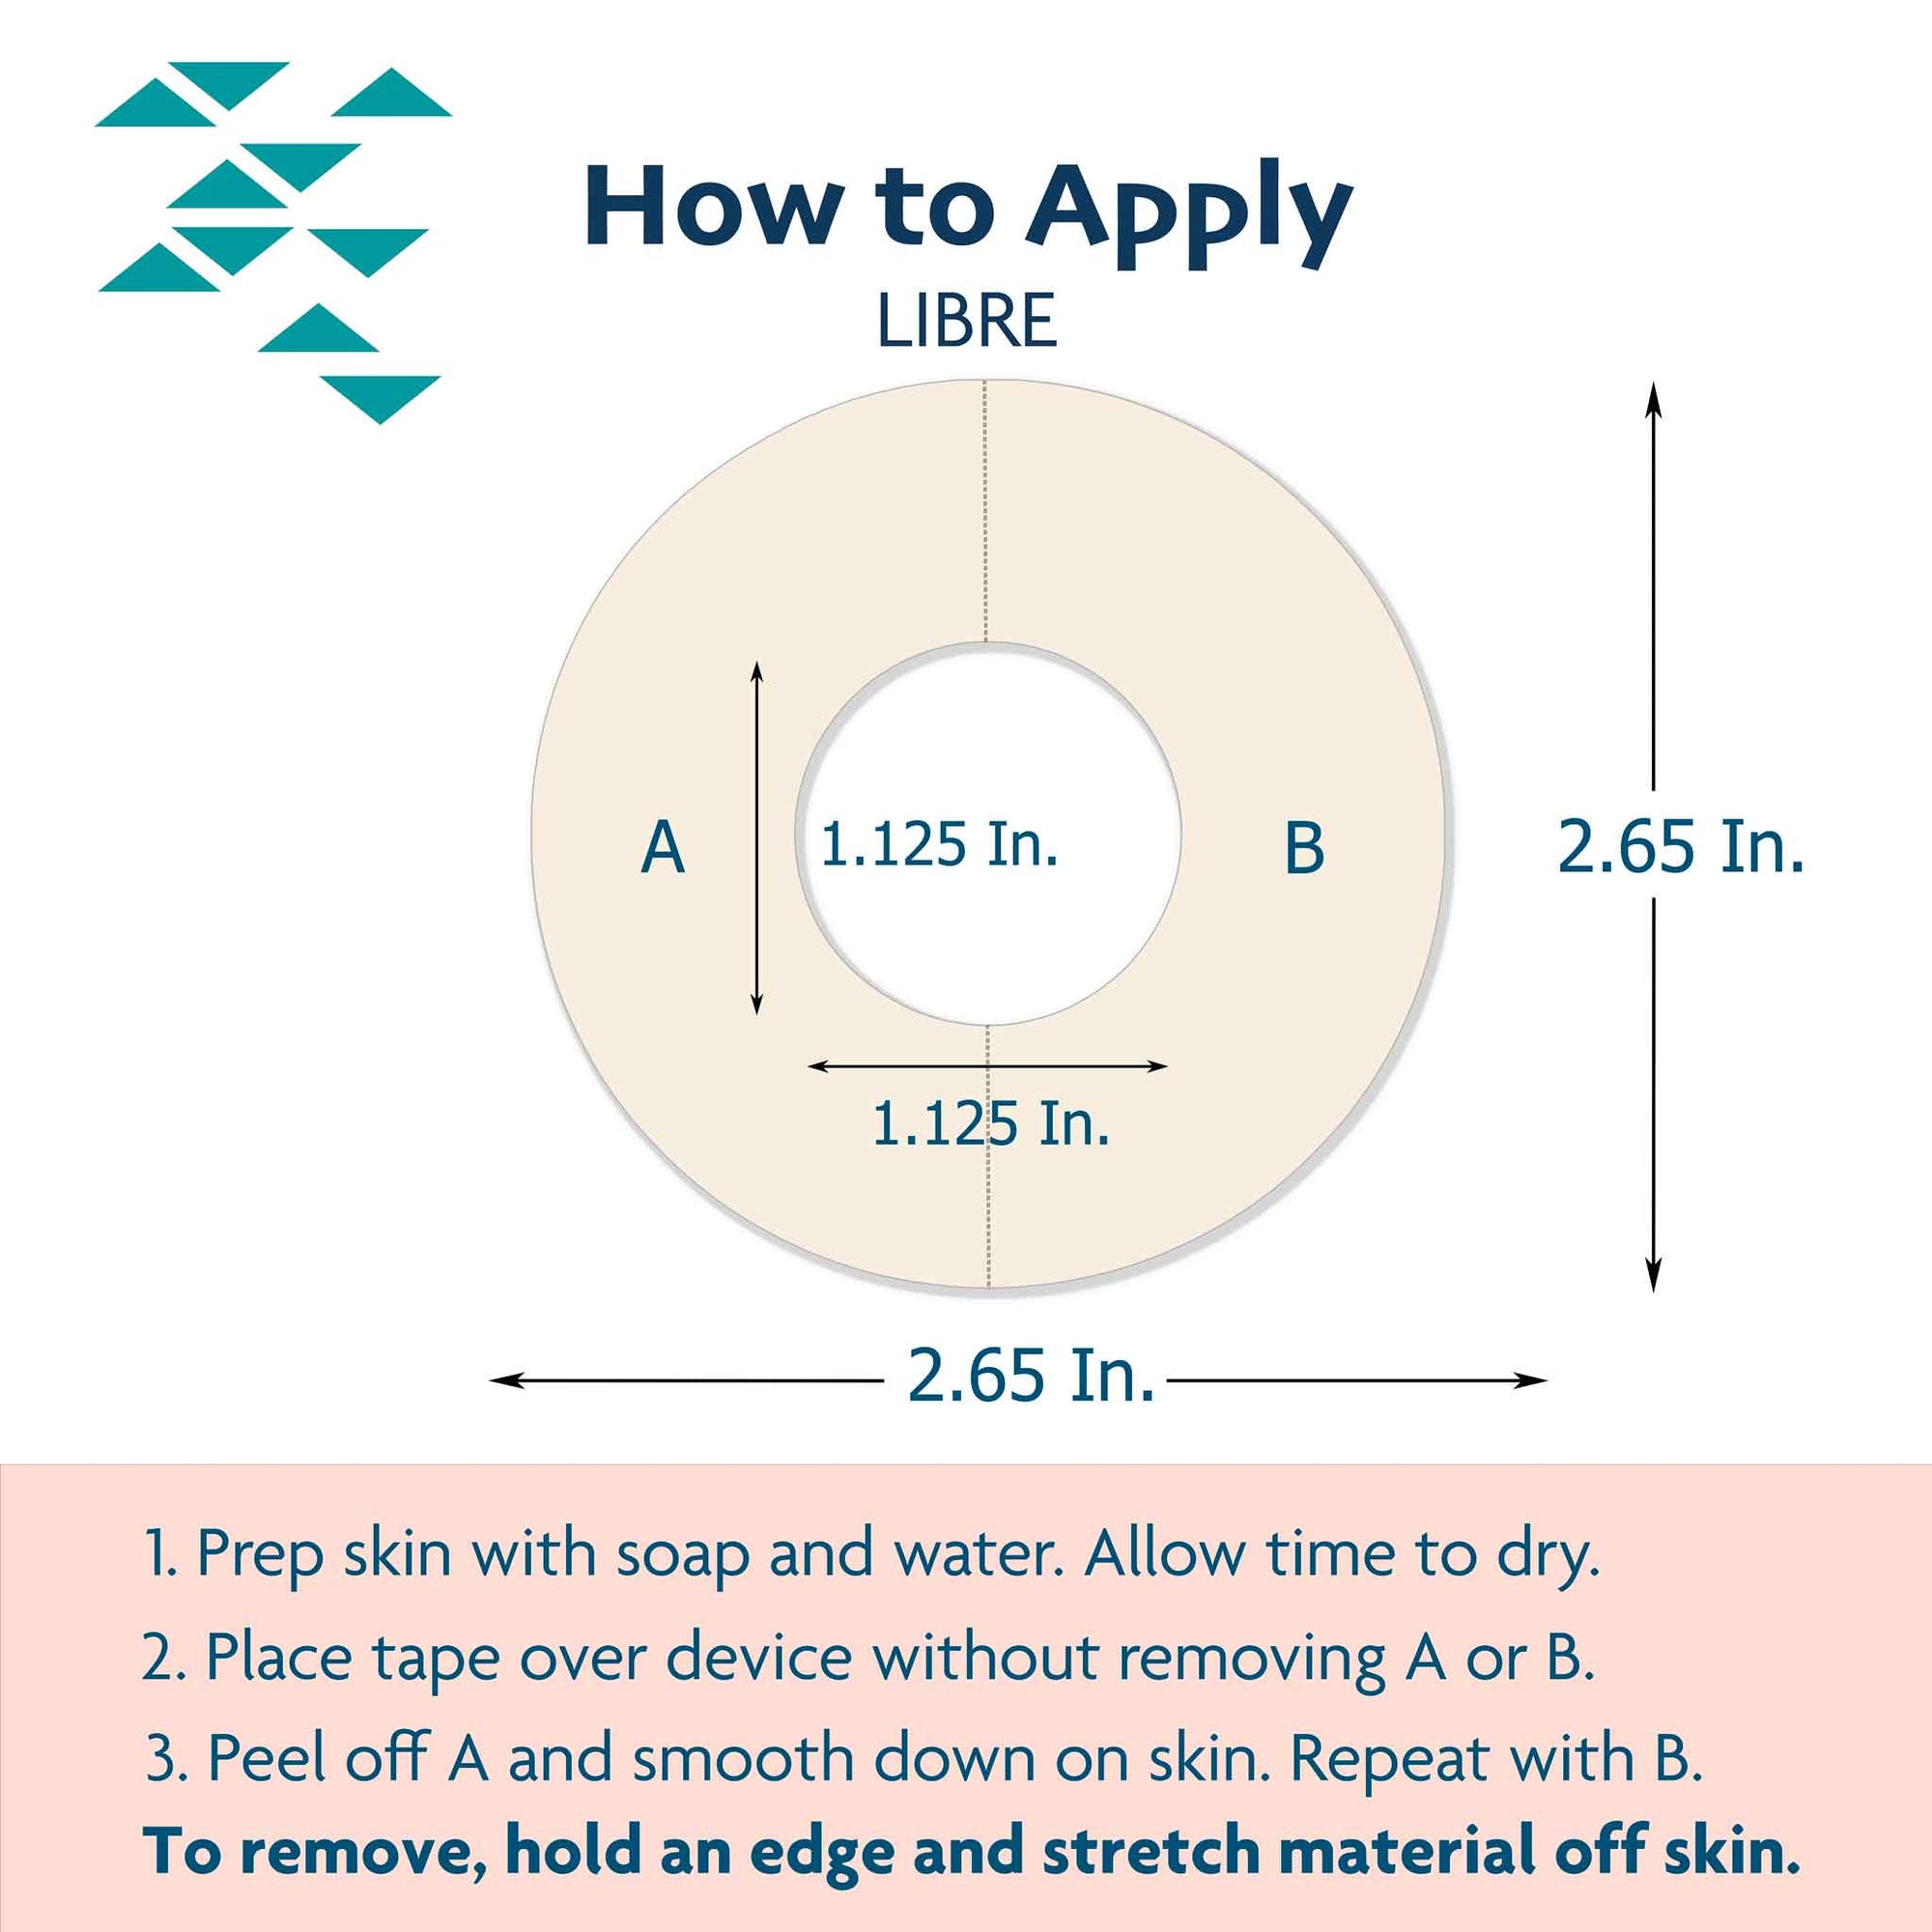 ExpressionMed Freestyle Libre application tutorial step by step to properly secure your CGM